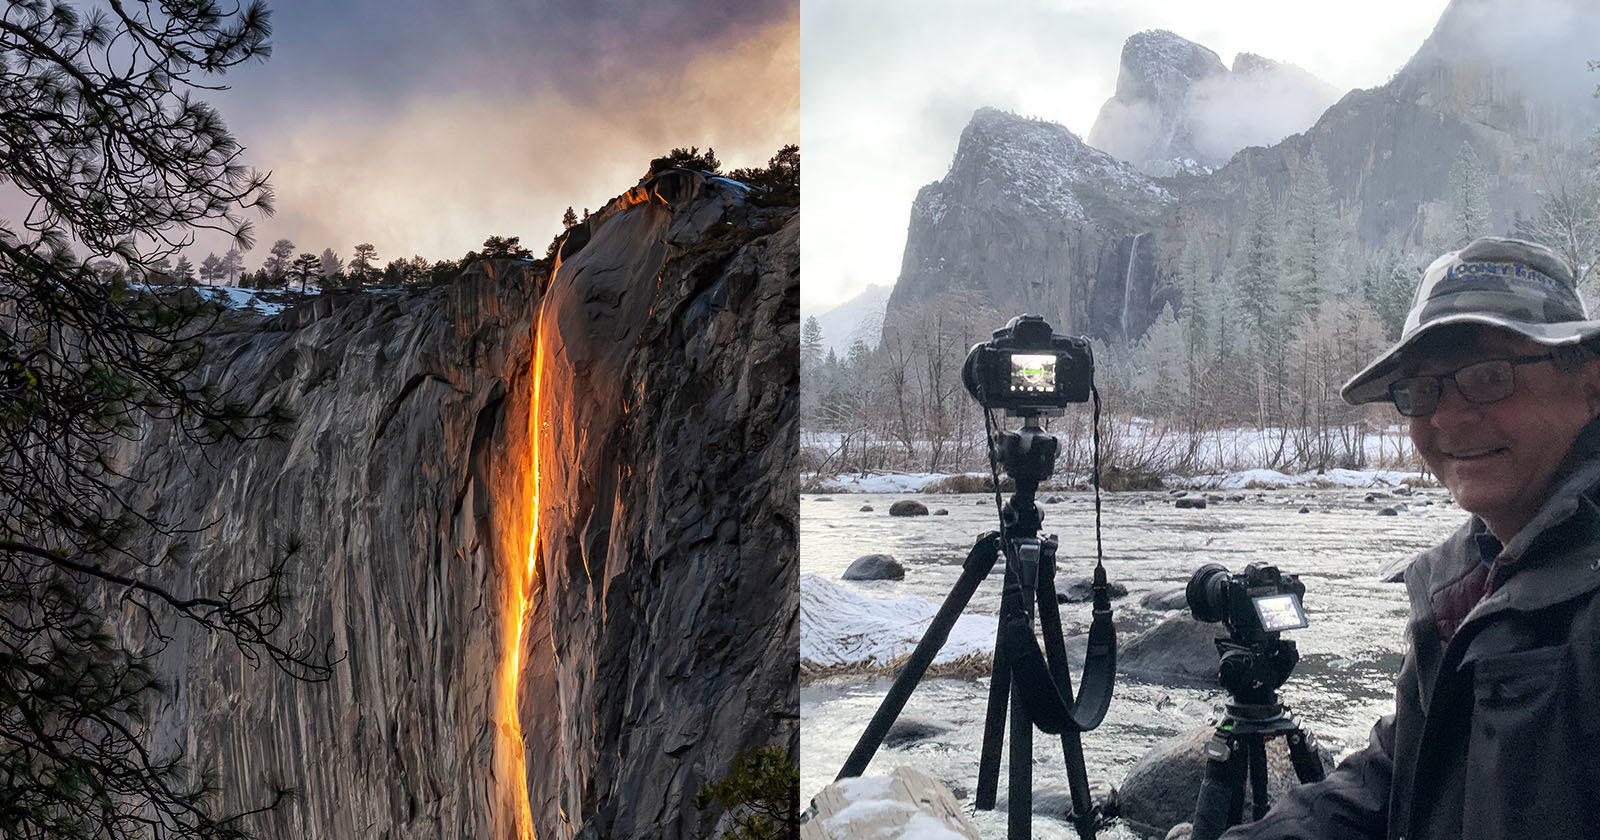 Yosemite Firefall: A Photographer’s Guide in 2022